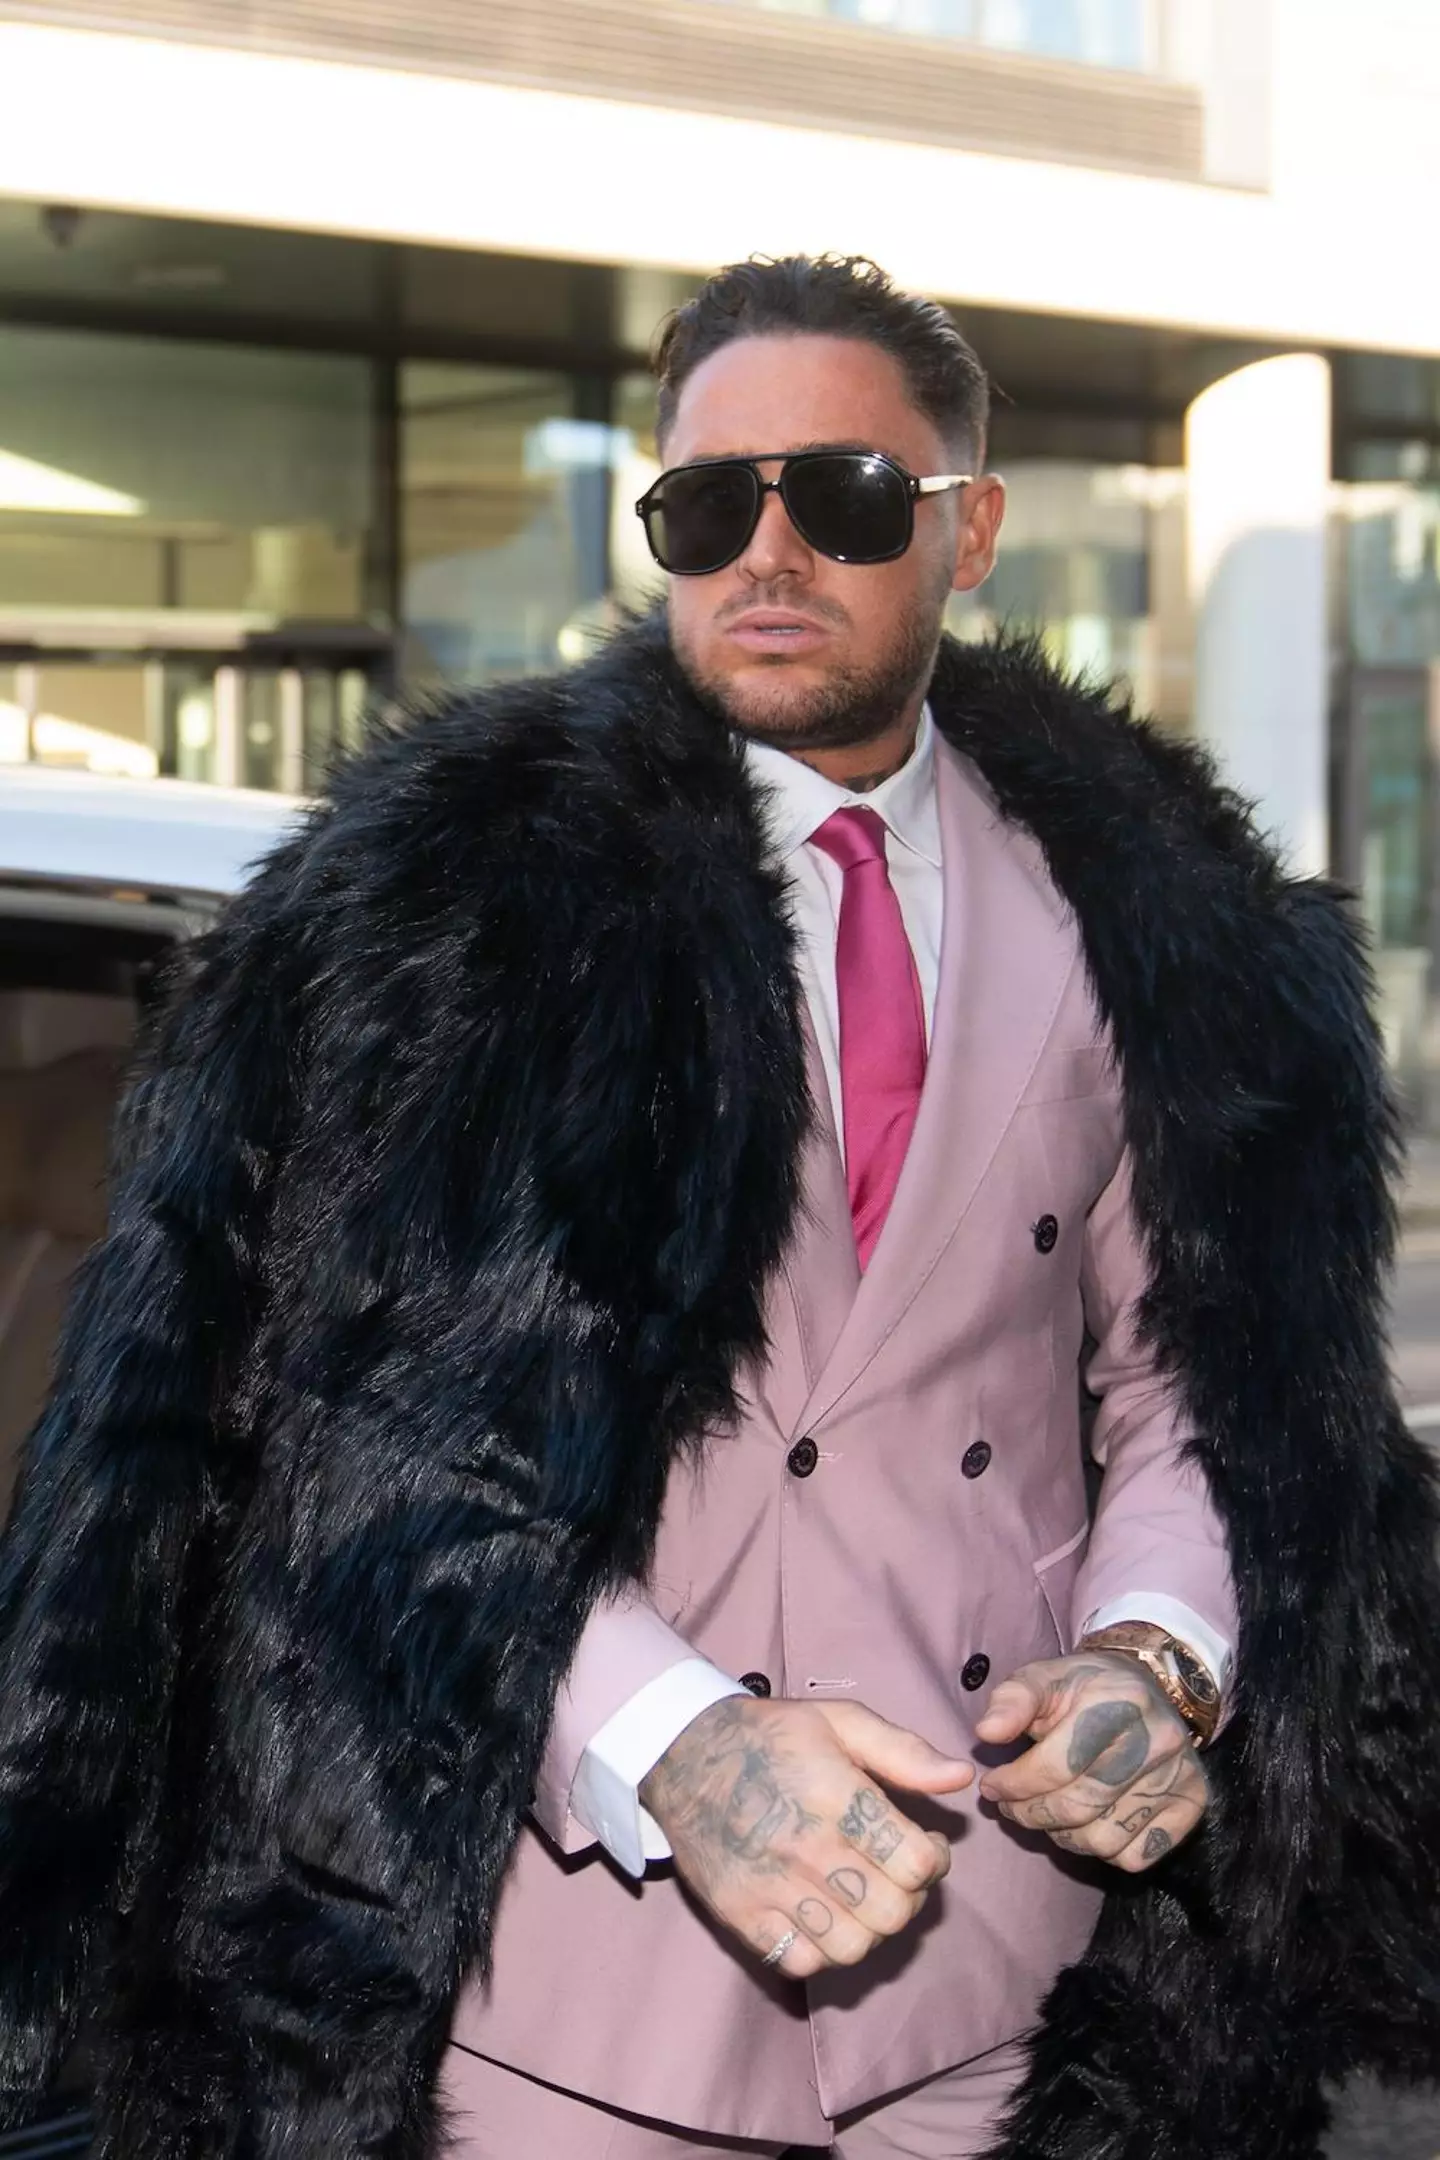 Stephen Bear was found guilty of revenge porn charges.